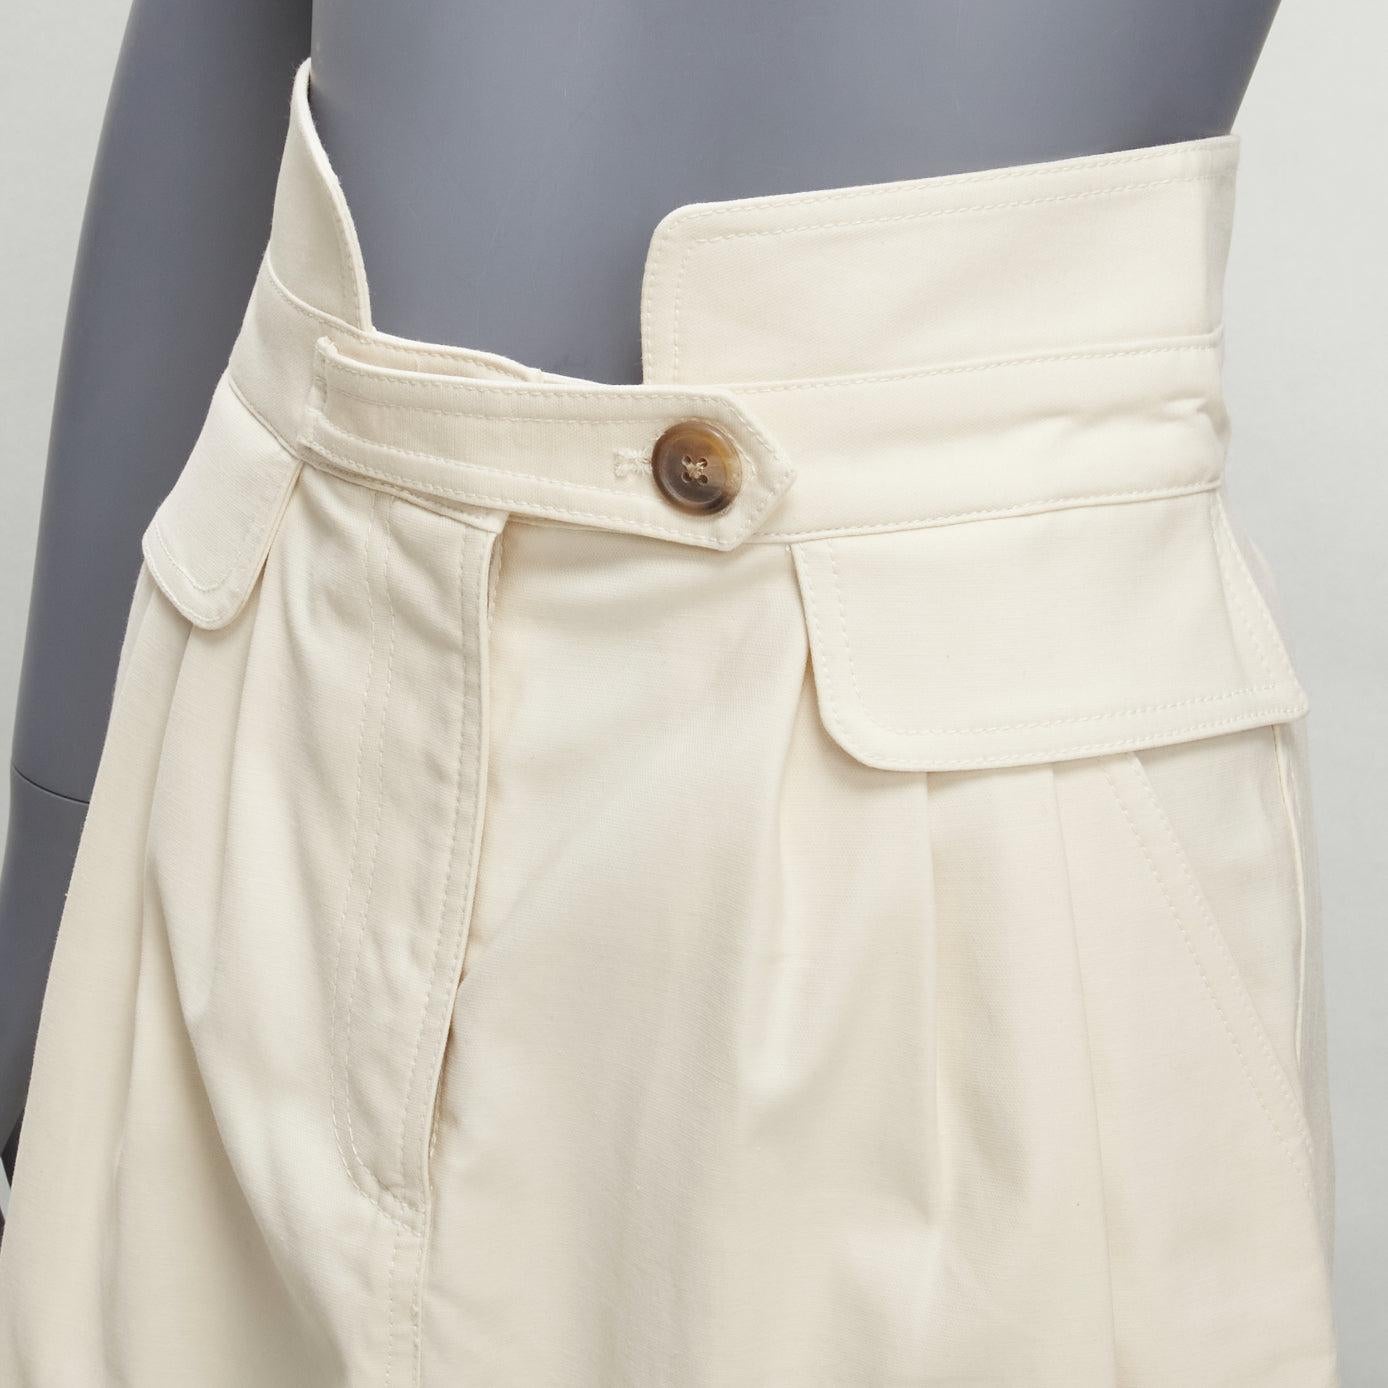 SEA NEW YORK cream cotton peplum pocket flap belt waist A-line worker skirt US0 XS
Reference: SNKO/A00412
Brand: SEA New York
Material: Cotton, Blend
Color: Cream
Pattern: Solid
Closure: Zip Fly
Lining: Cream Fabric
Extra Details: Gathered waist